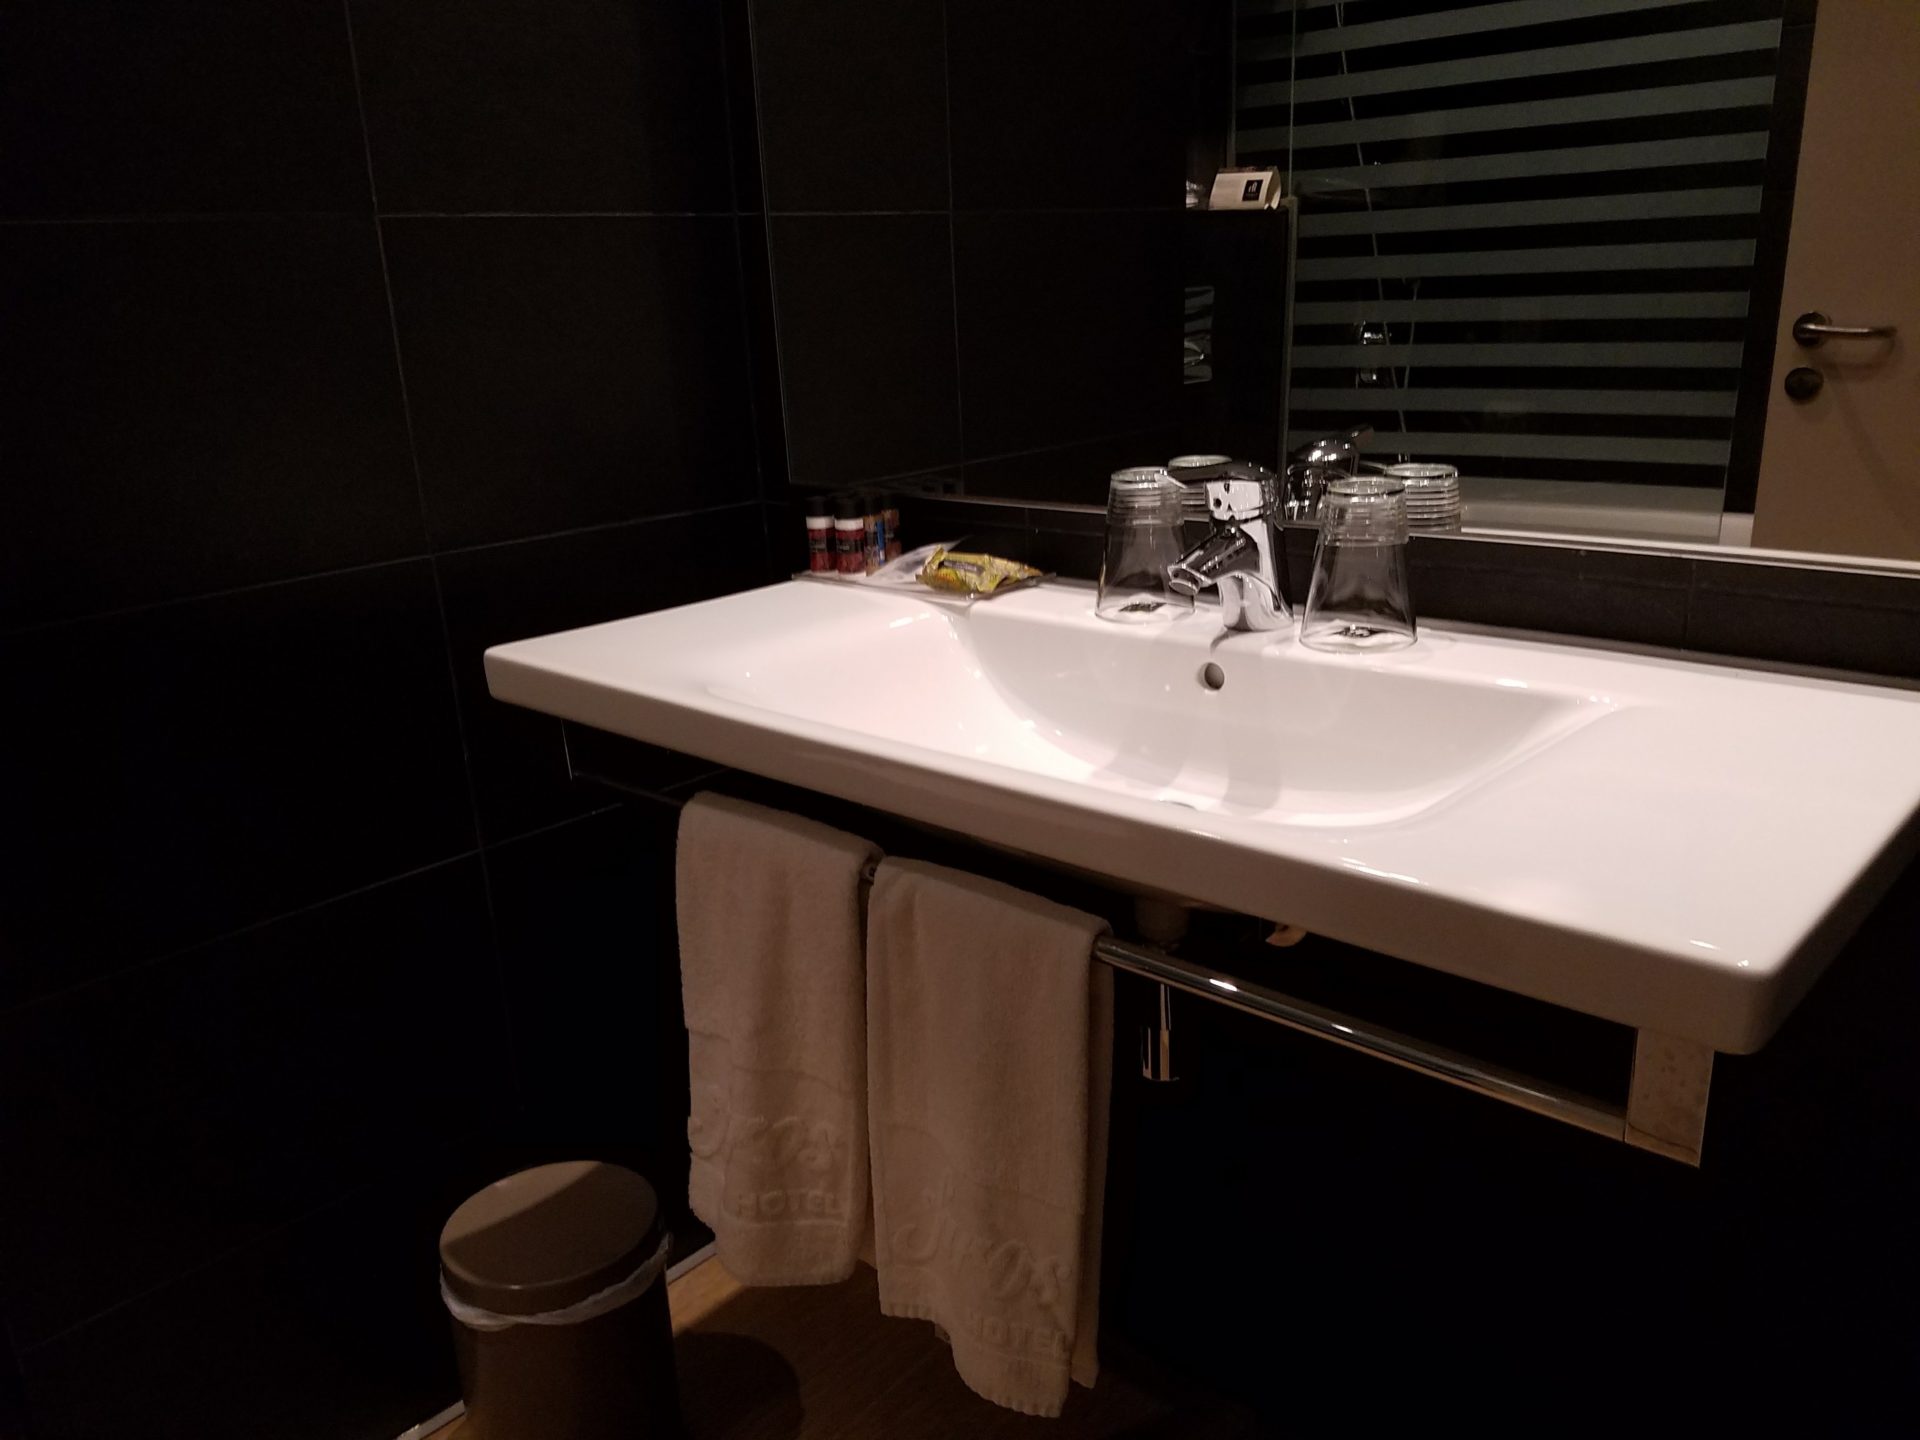 a bathroom sink with towels on the wall